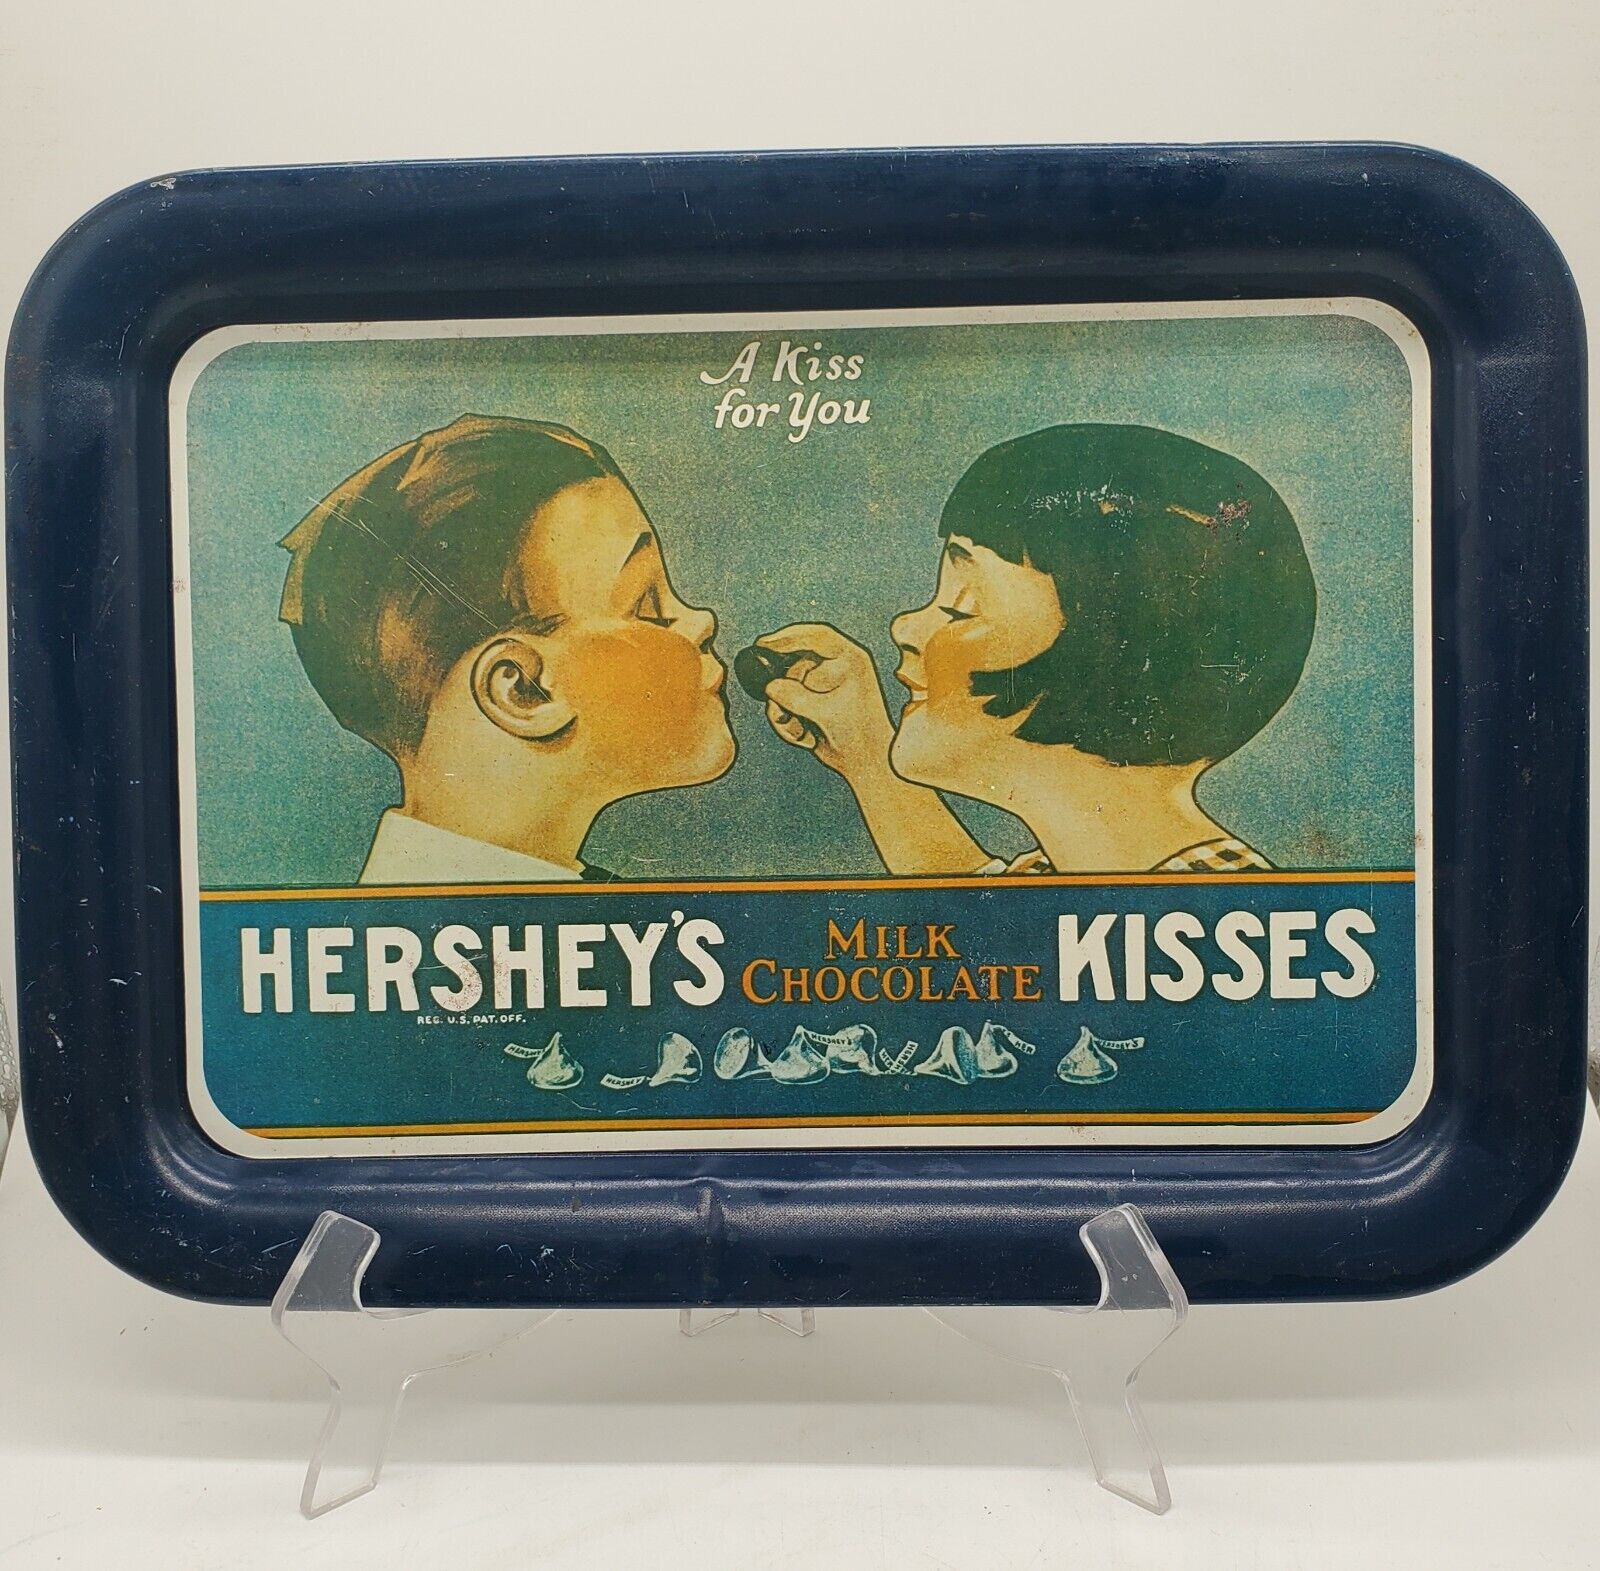 Vintage Hershey’s Milk Chocolate Kisses Metal Serving Tray. “A Kiss For You”